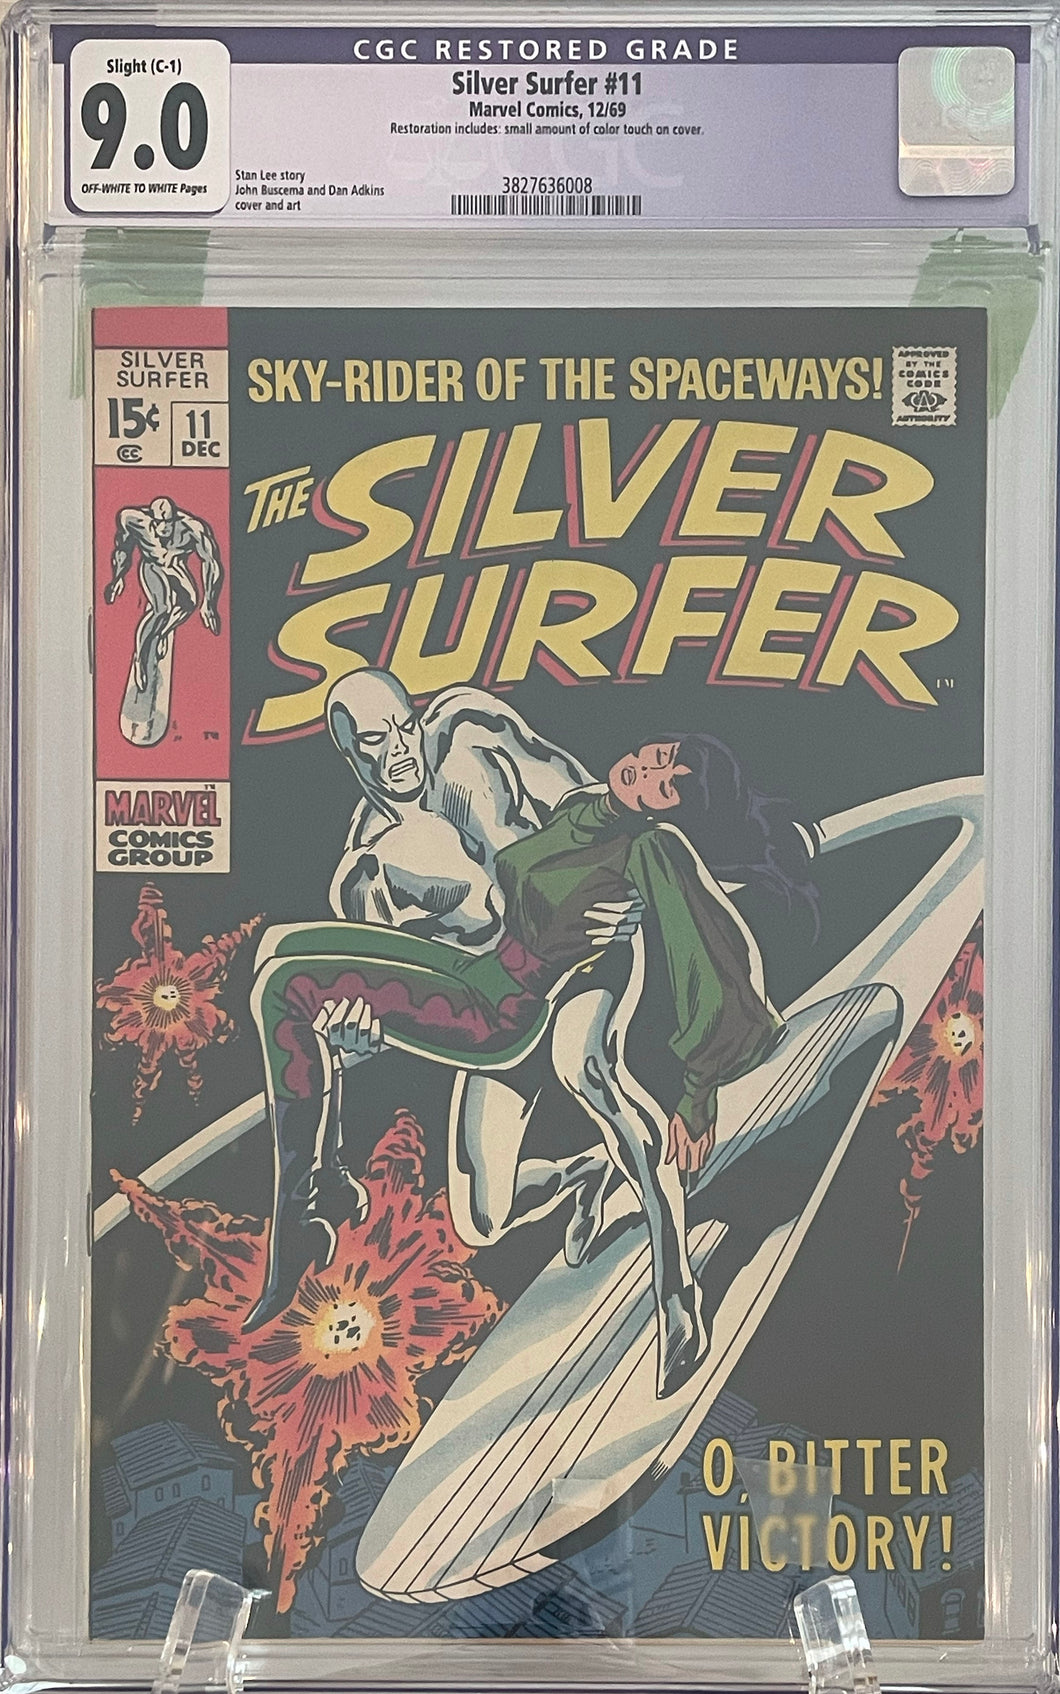 The Silver Surfer #11 CGC QUALIFIED 9.0